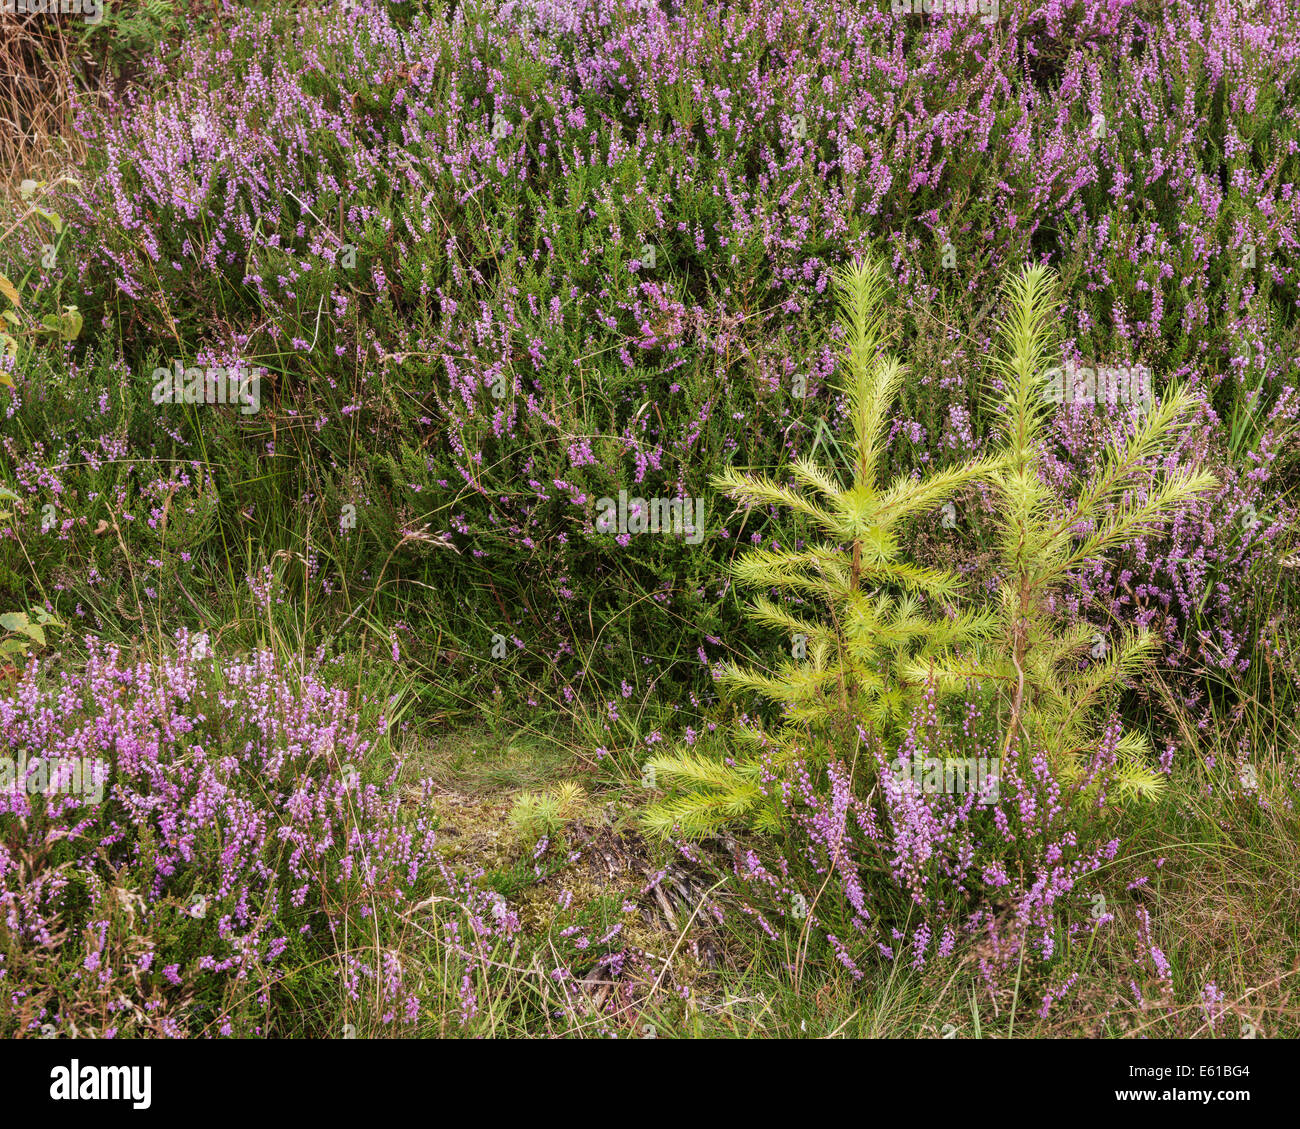 Two small fir trees growing together amongst the heather in Cliff Ridge Wood, Yorkshire, England, GB. They have been successful in seeding themselves. Stock Photo